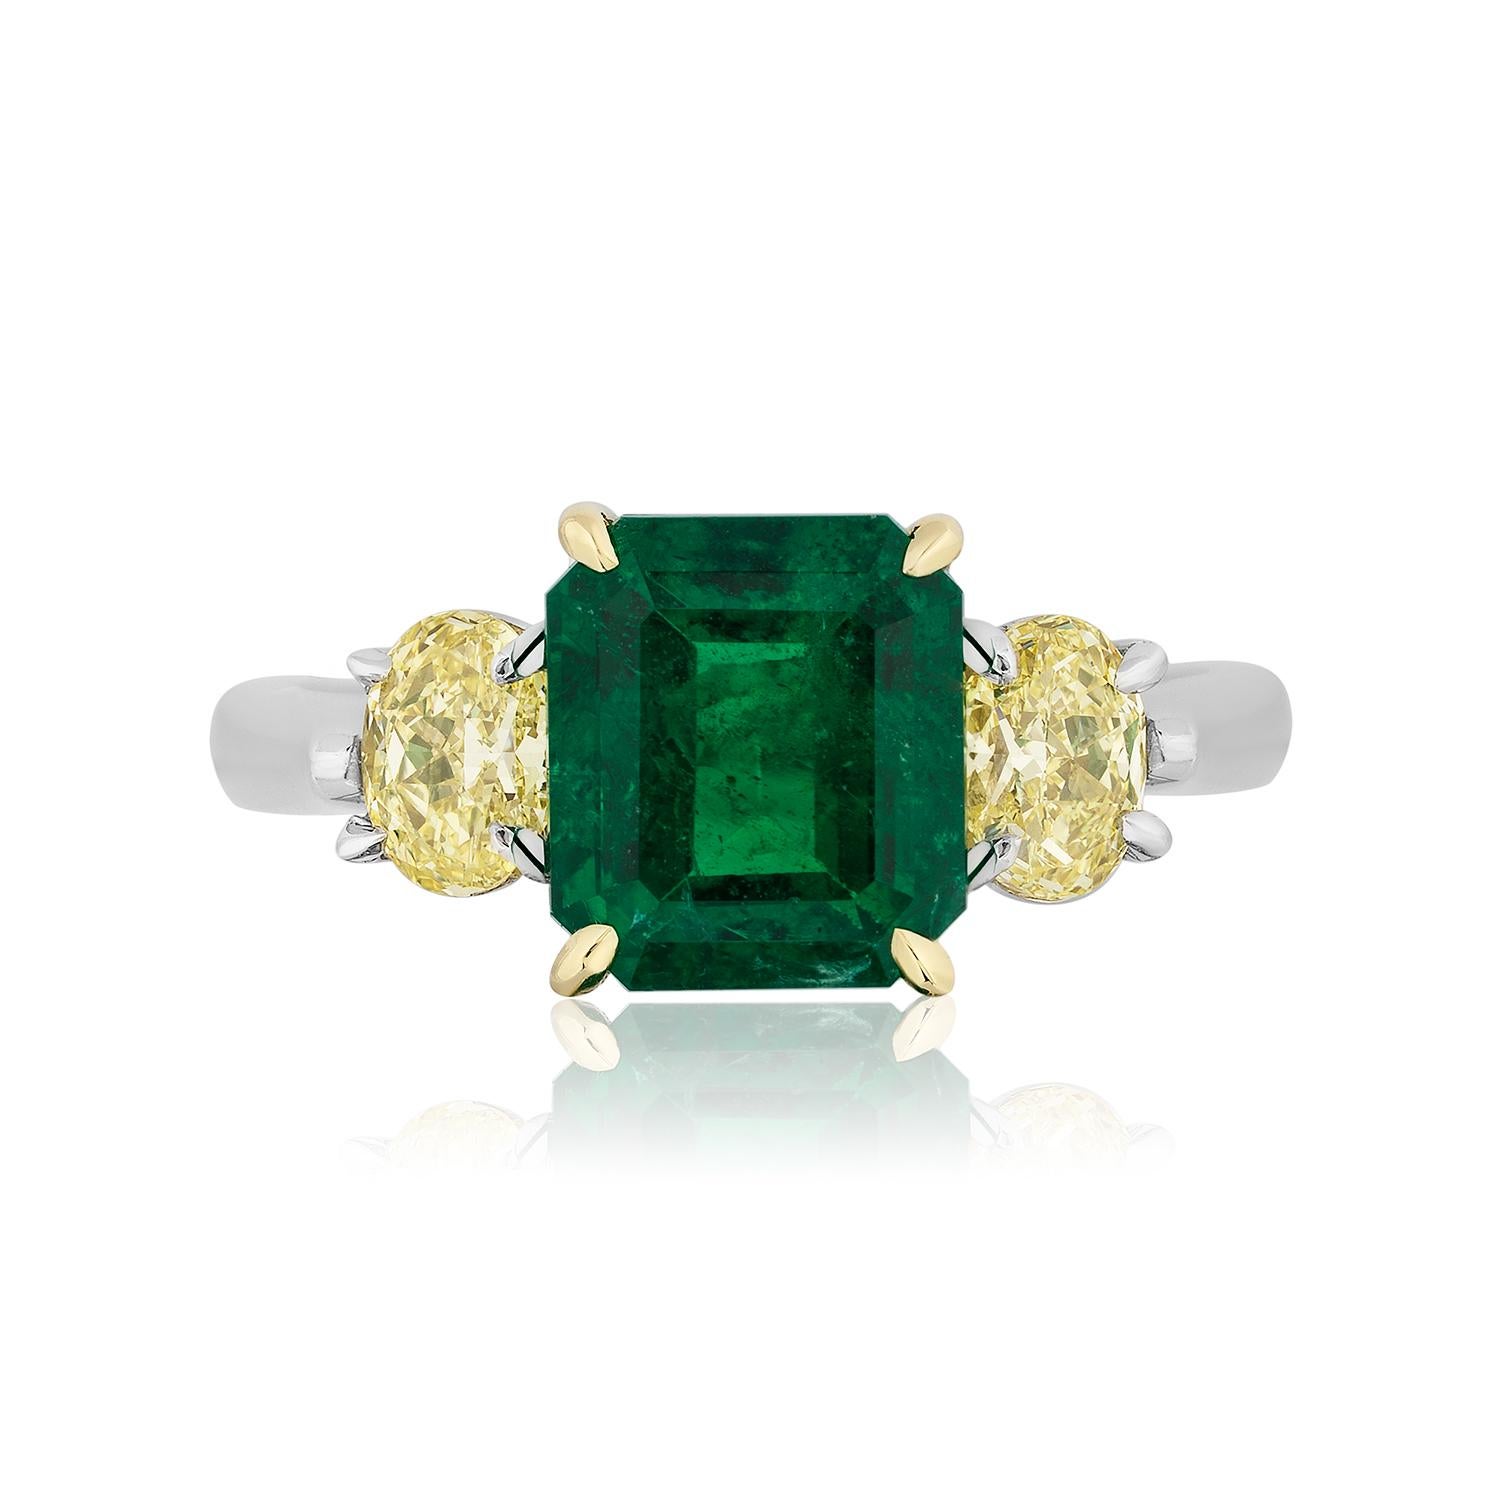 Andreoli 2.96 Carat Zambian Emerald Diamond Platinum Ring CDC Certified

This ring features:
- 2.96 Carat Emerald
- 0.79 Carat Fancy Yellow Diamond
- 5.95 Gram Platinum
- Made In Italy